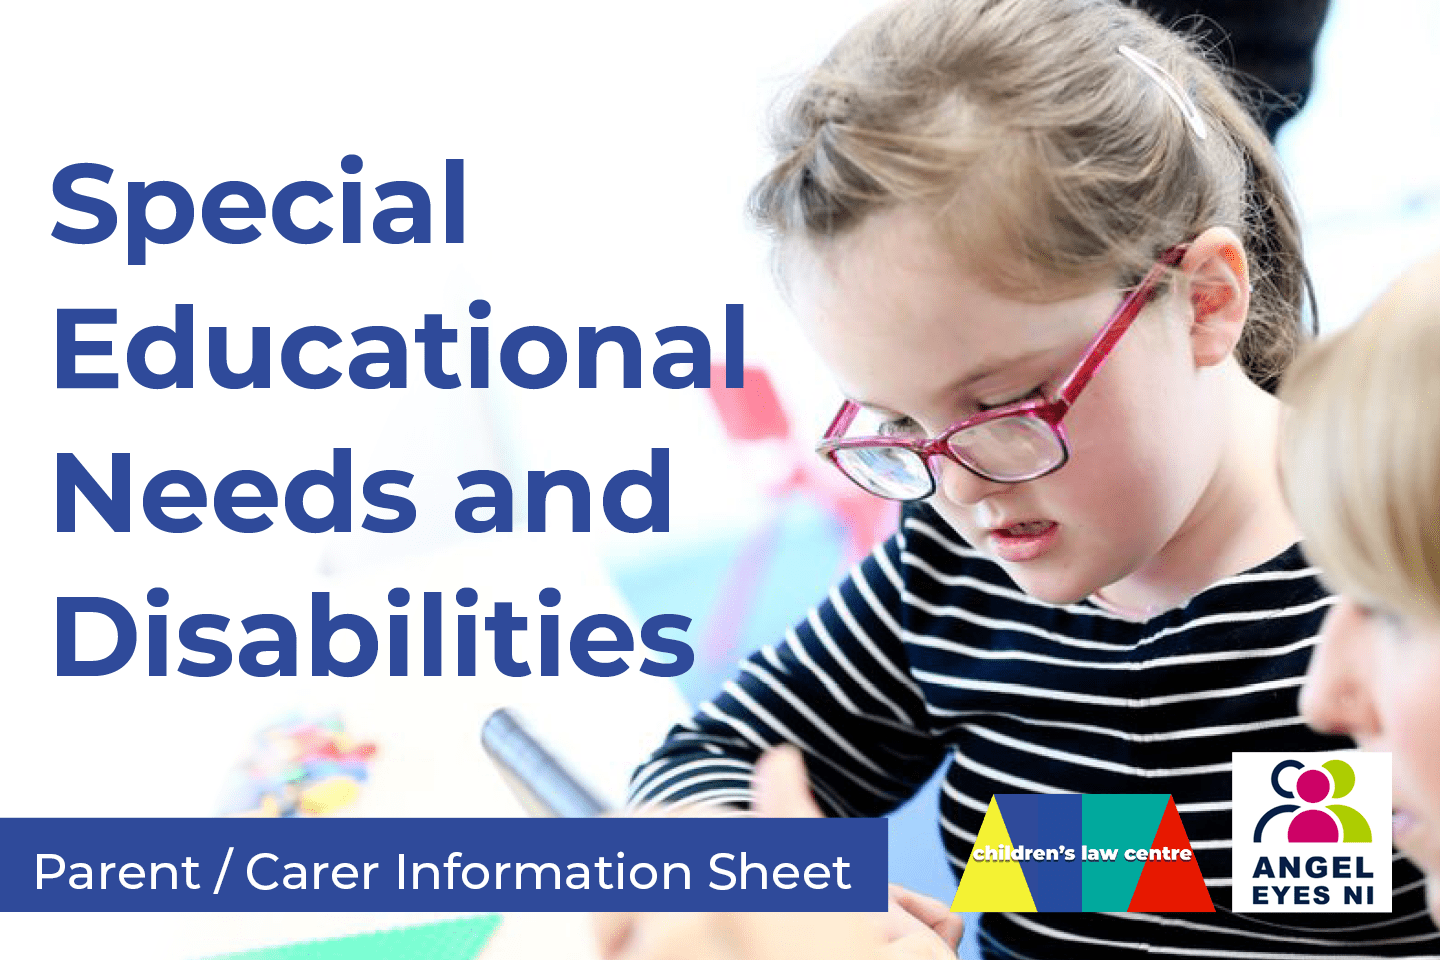 Image of young visually impaired girl, with text reading 'Parent / Carer Information Sheet - Special Educational Needs and Disabilities'